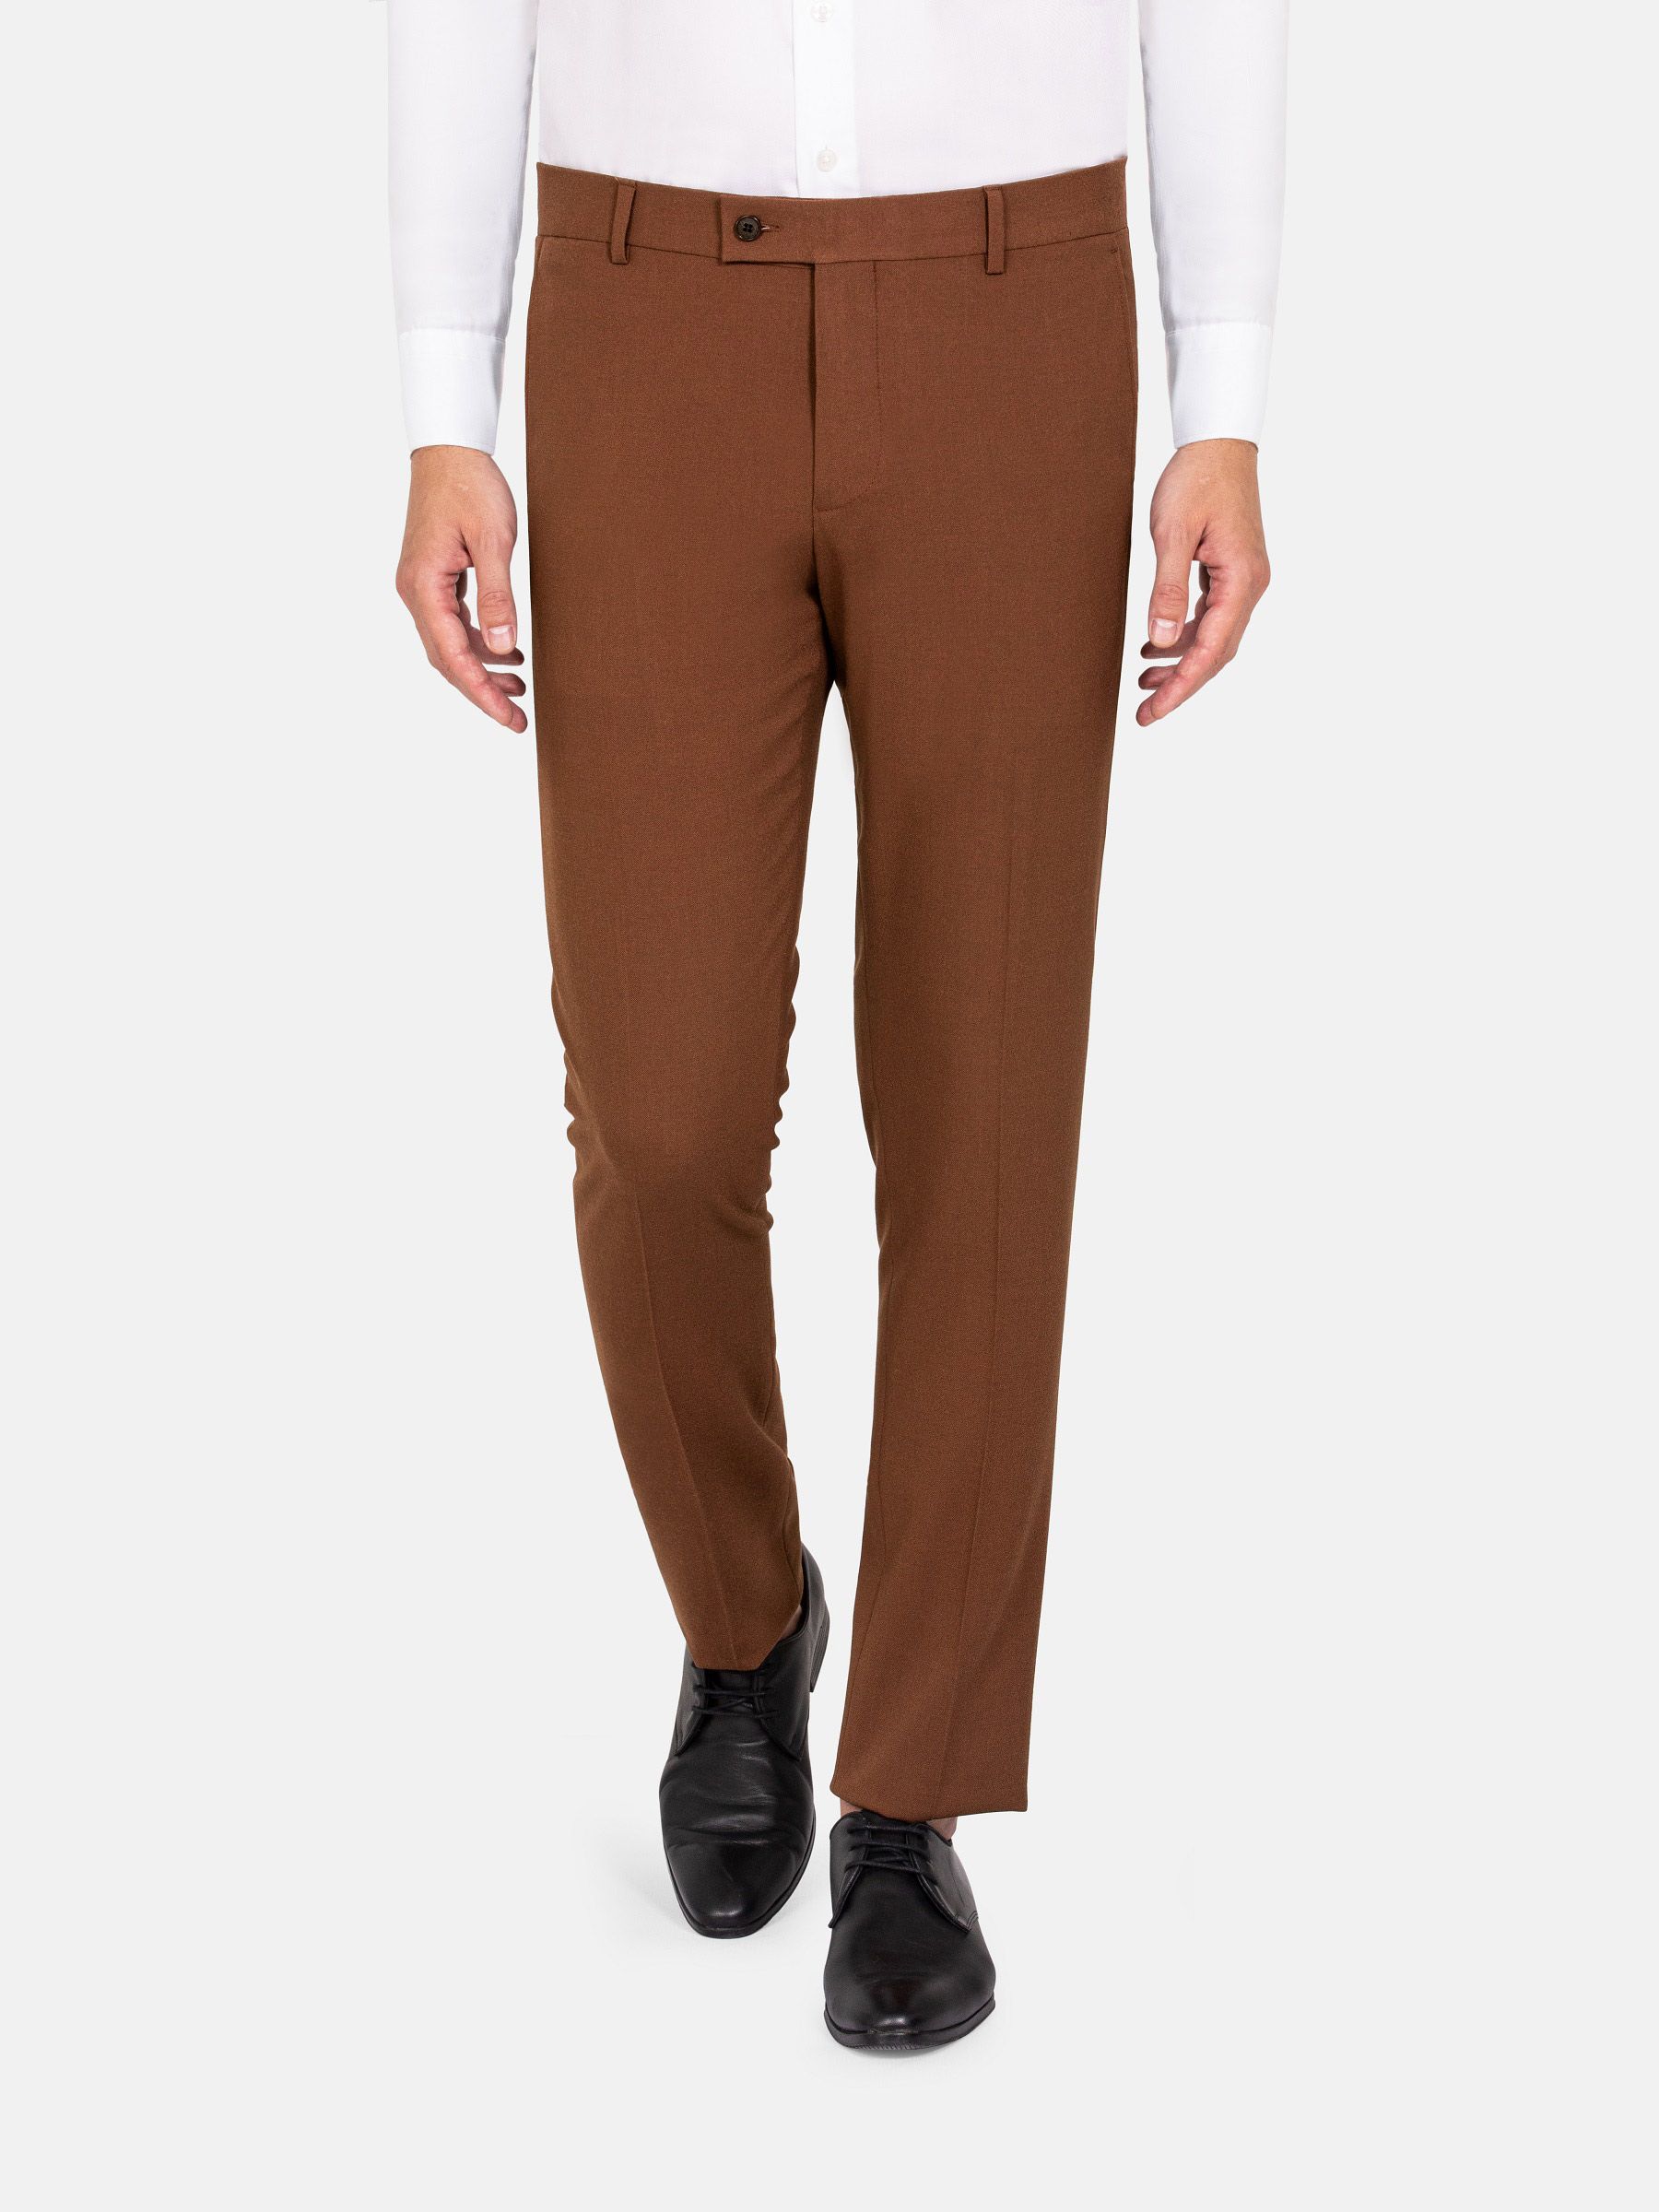 Buy Textured Slim Fit Formal Pants with Pockets